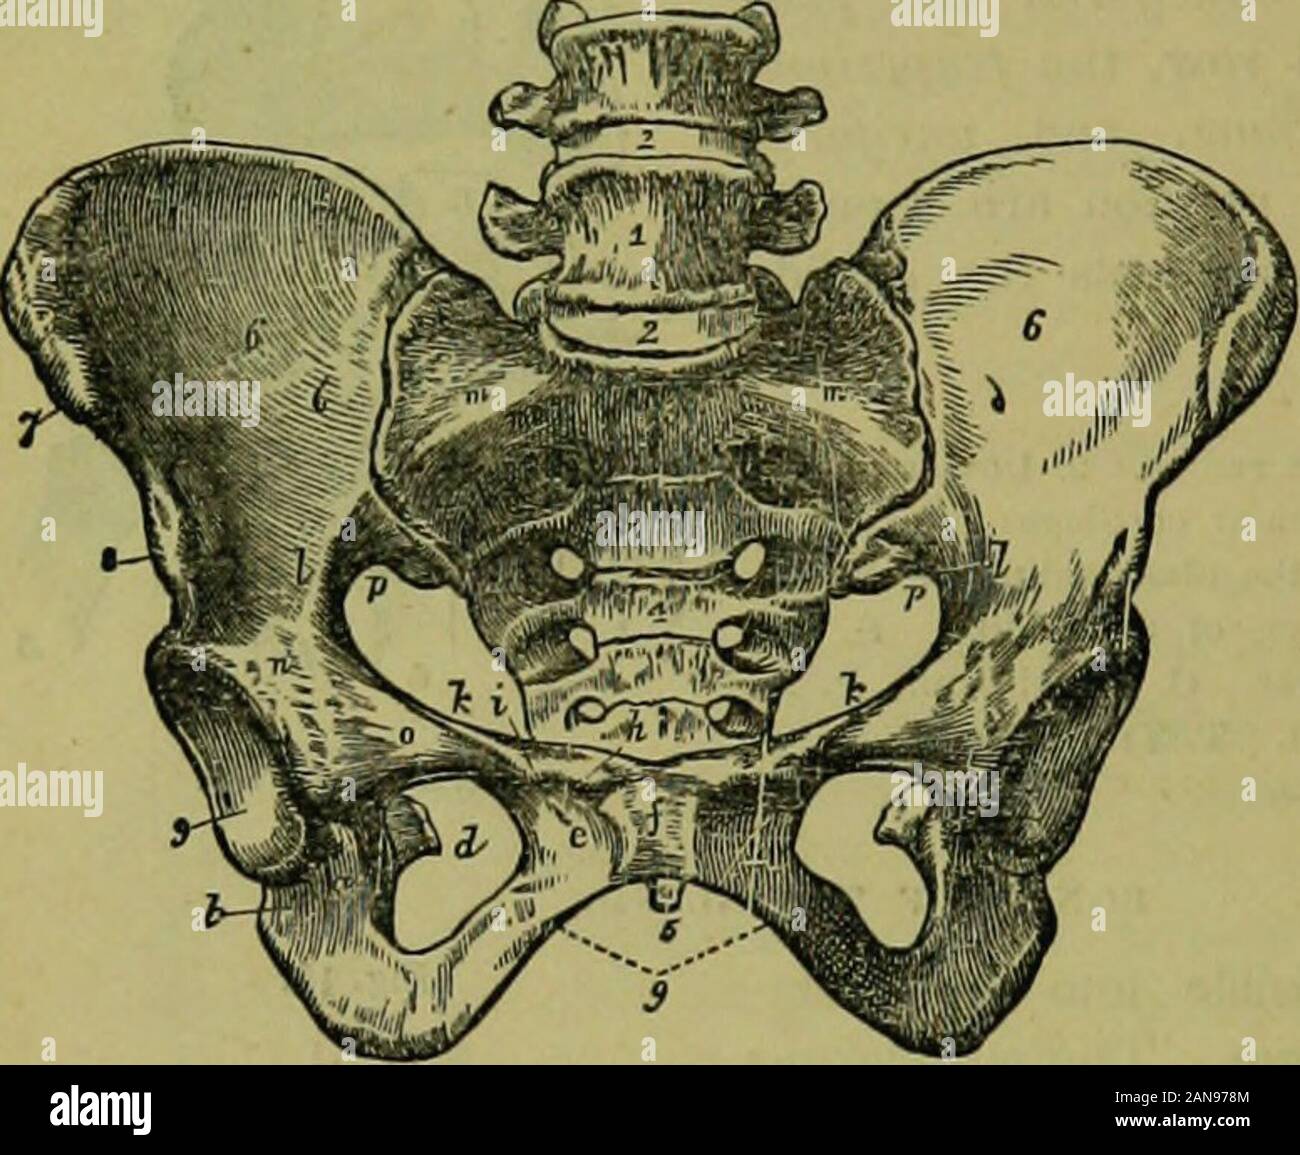 The hydropathic encyclopedia: a system of hydropathy and hygiene .. . ncal line; m, m, its prolongation to thf promontoryjf the sacrum. The brim of the true pelvis is represented by the liny ft, i, ft ft, 11, m mit. The ilio-pectineal eminence, o. The smooth surface which supports the femoral ves•els. p, p. The great sacro ischiatic notch. The pelvis is situated obliquely in relation to the trunk of the bod^r,the inner surface of the ossa pubis being directed upward to supportthe superincumbent viscera of the abdomen. Its cavity measures indepth four inches and a half posteriorly, three and a Stock Photo